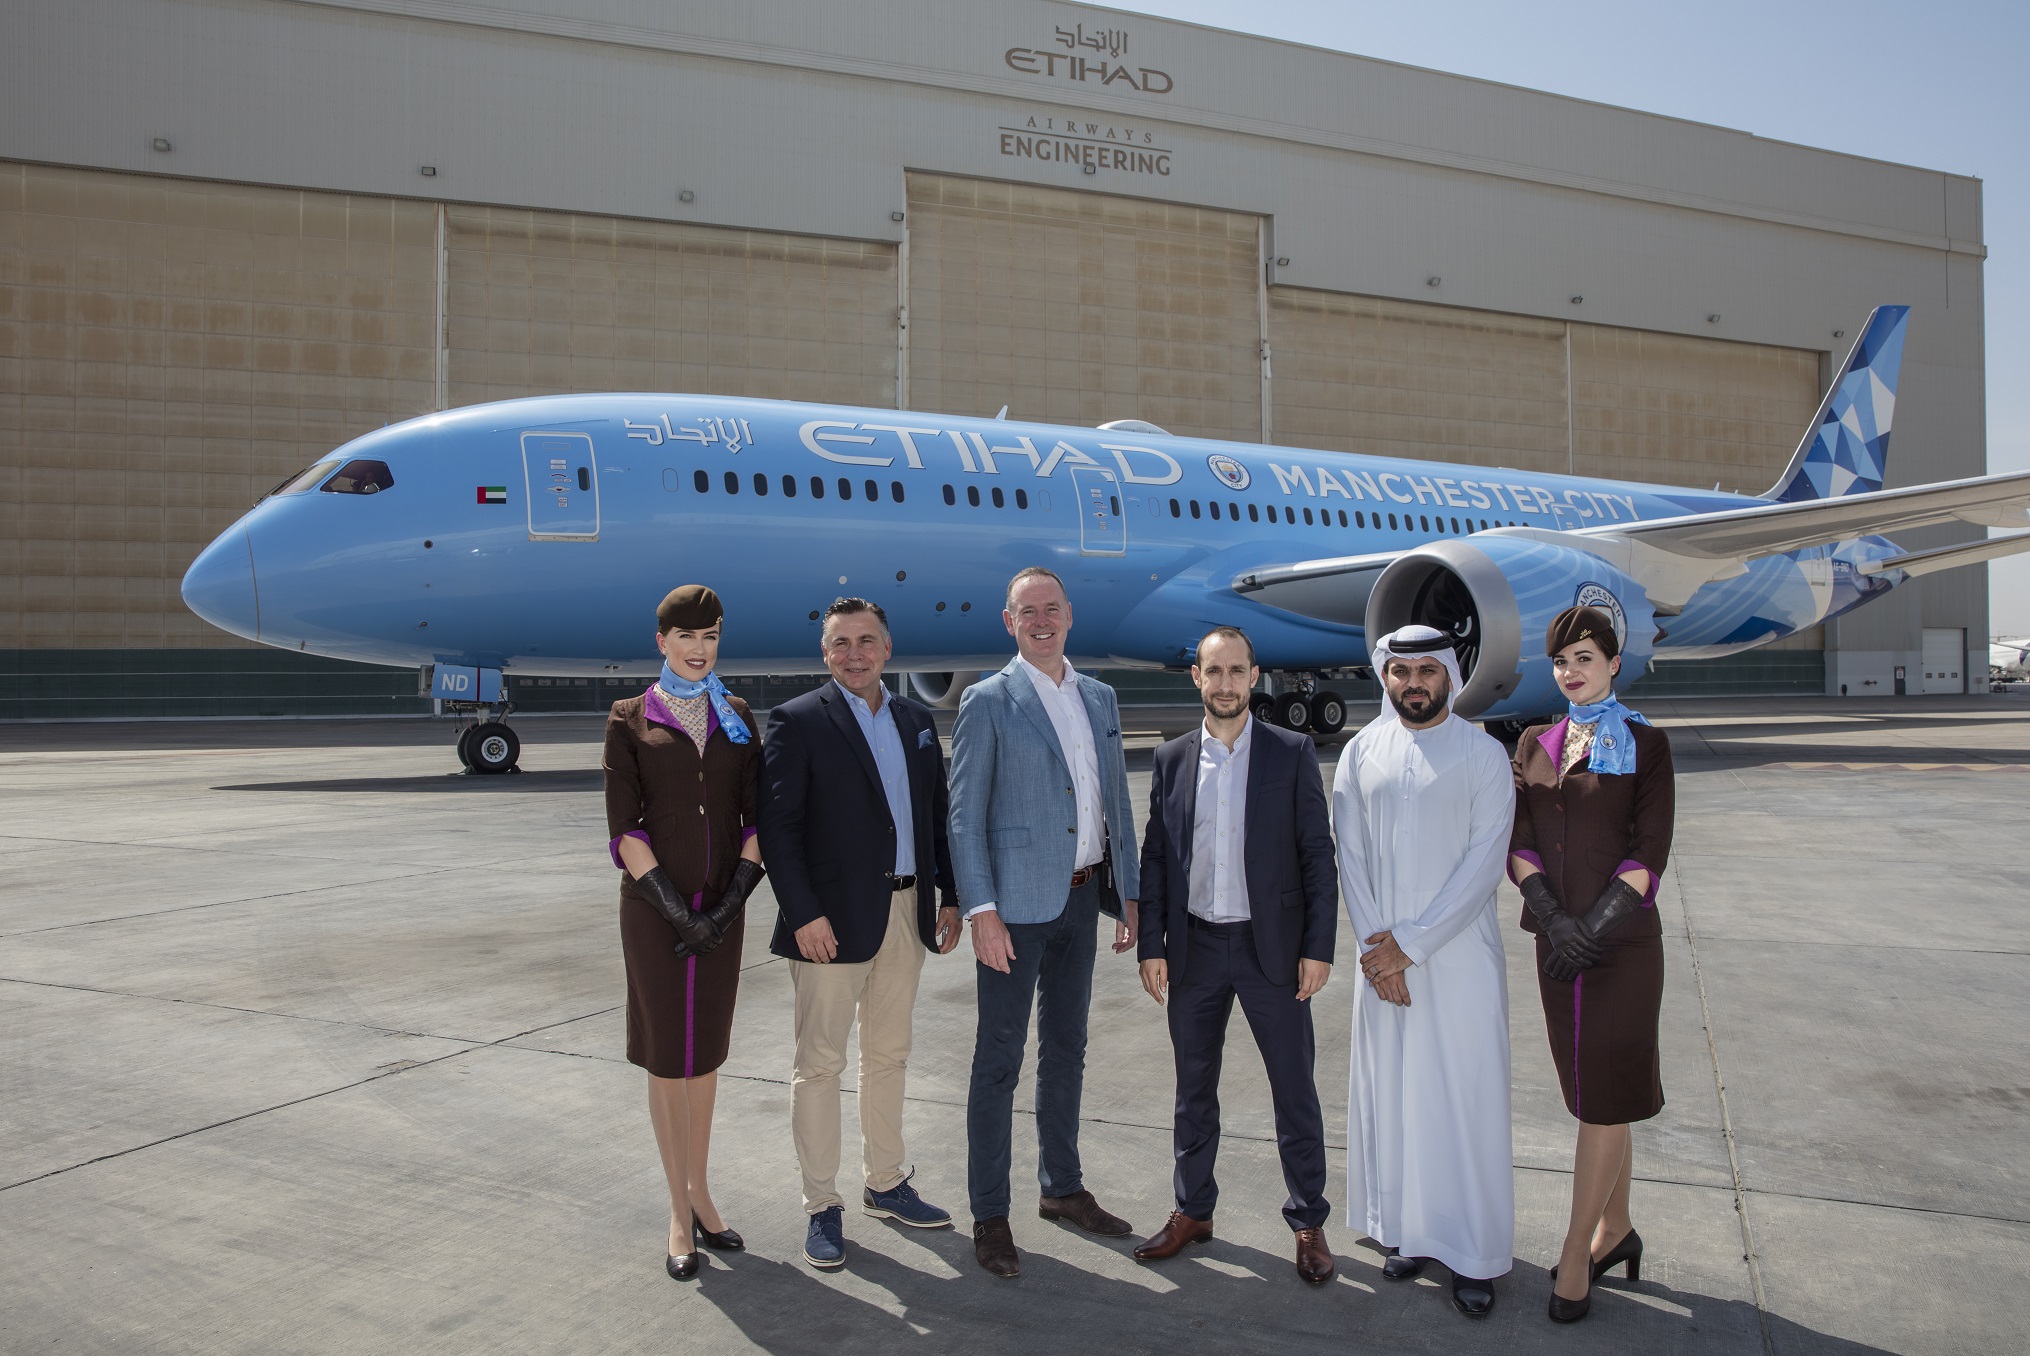 The aircraft was received by Etihad Aviation Group and Manchester City Football Club executives (left to right): Robin Kamark, Chief Commercial Officer, Etihad Aviation Group, Tony Douglas, Group Chief Executive Officer, Etihad Aviation Group, Olivier Turkel, Manchester City Football Club Regional Director MENA, and Yasser Al Yousuf, Vice President Commercial Partnerships, Etihad Aviation Group.   The new livery was painted by Boeing at their Charleston, North Carolina factory. Background on Etihad’s partnership with Manchester City Football Club -Photo By Sachin Murdeshwar GPN